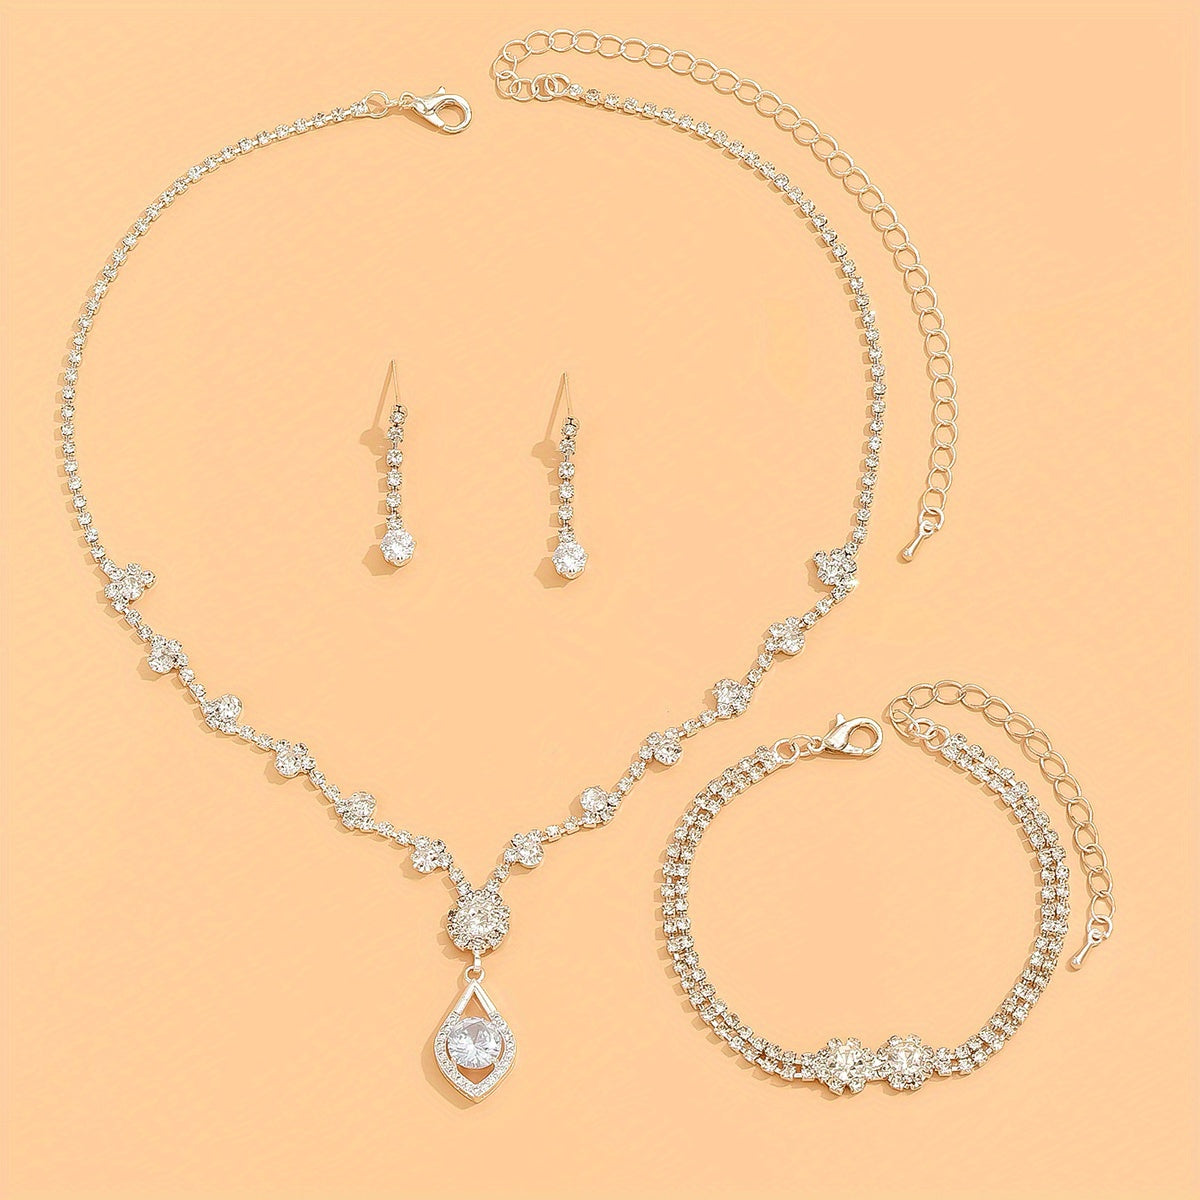 4pcs Earrings Necklace Plus Bracelet Elegant Jewelry Set Silver Plated Inlaid Rhinestone Dainty Engagement Wedding Jewelry For Brides Evening Party Decor